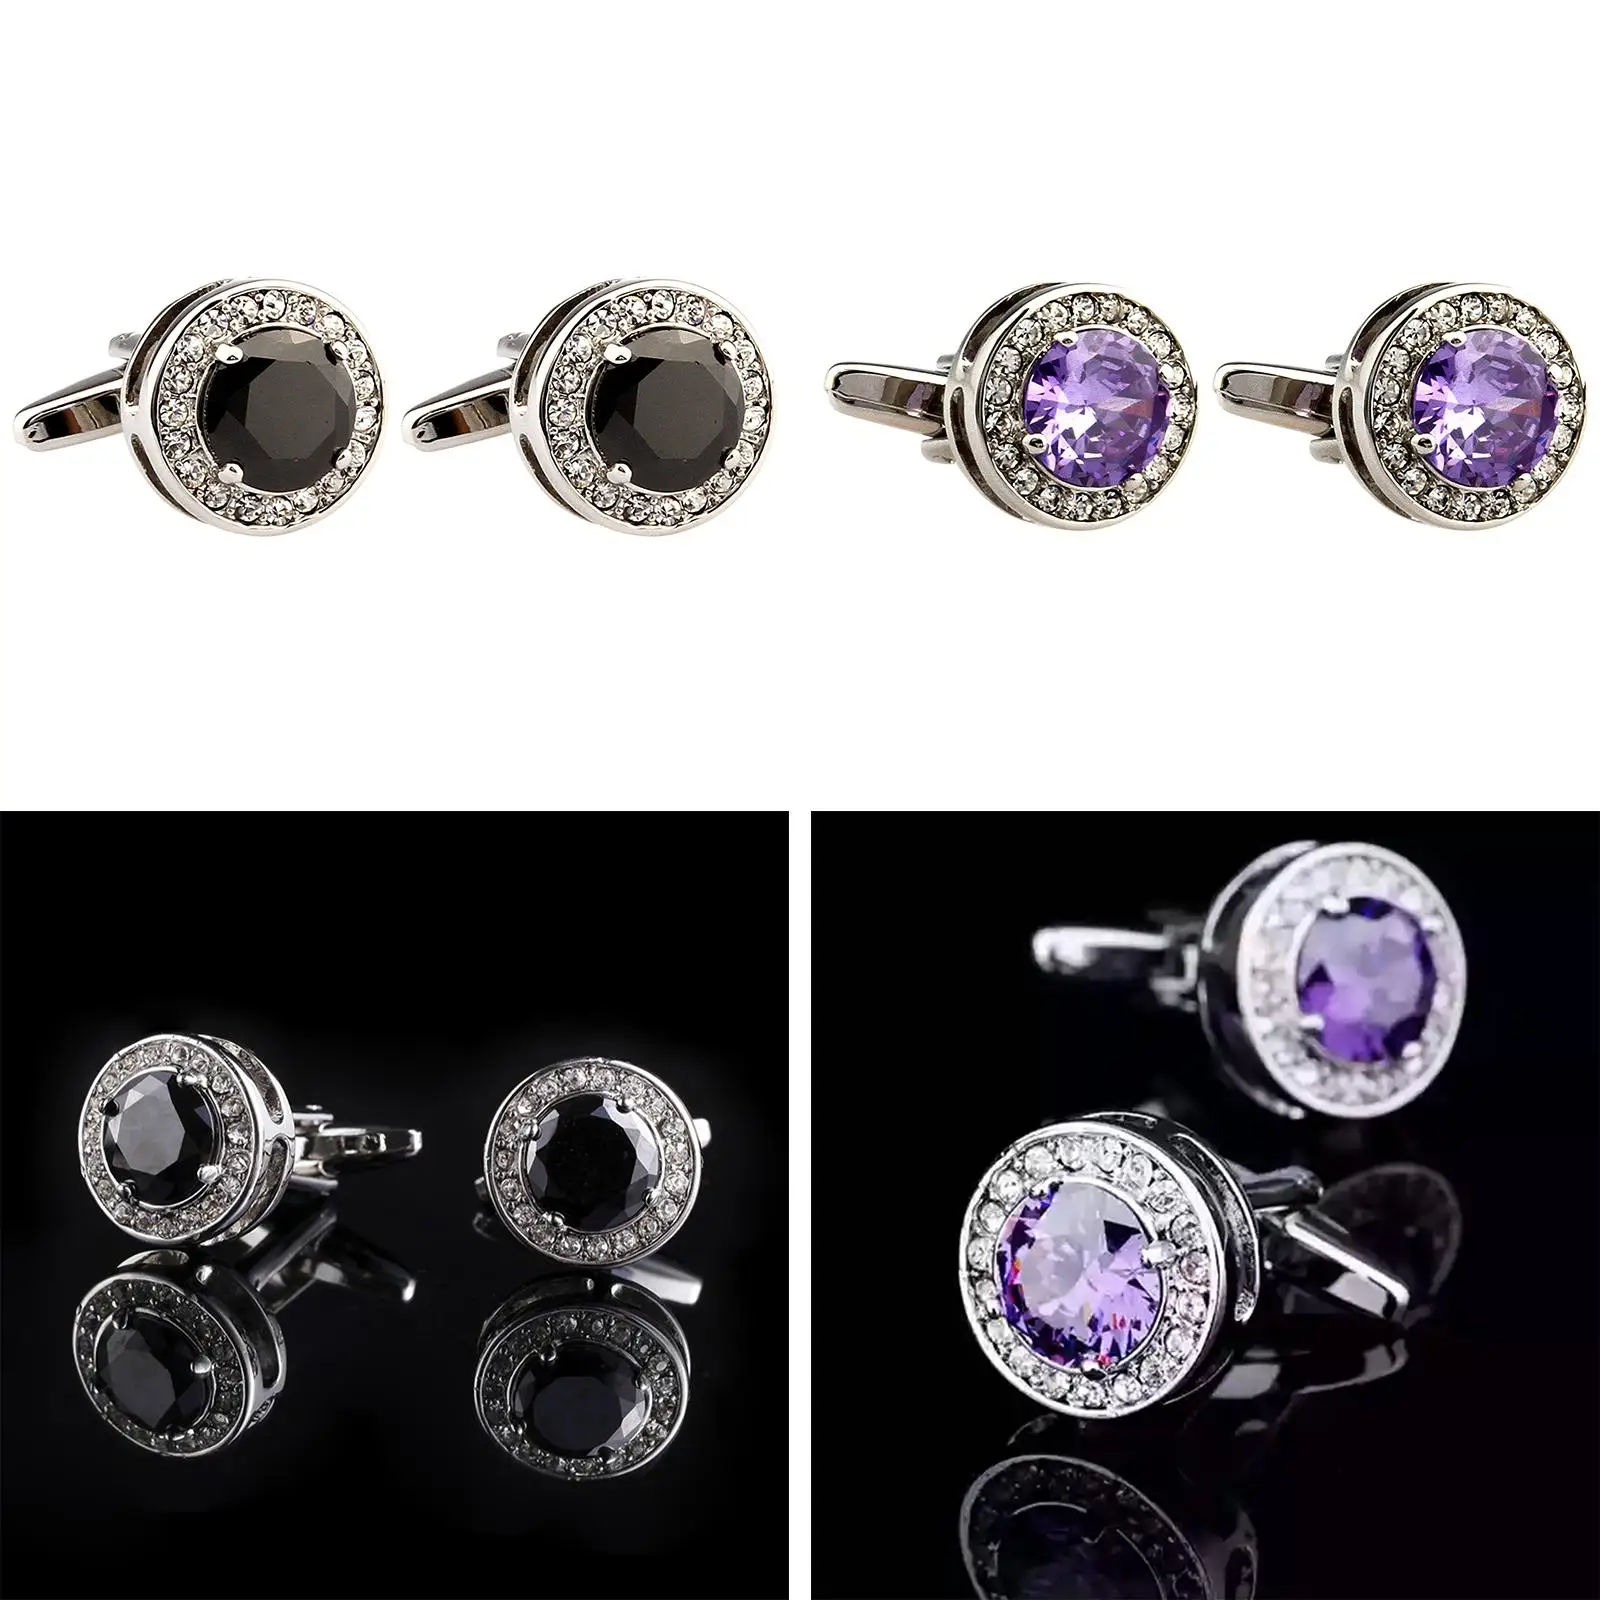 Classic Mens Cufflinks Crystal for Wedding Anniversary Gifts Cocktail Party